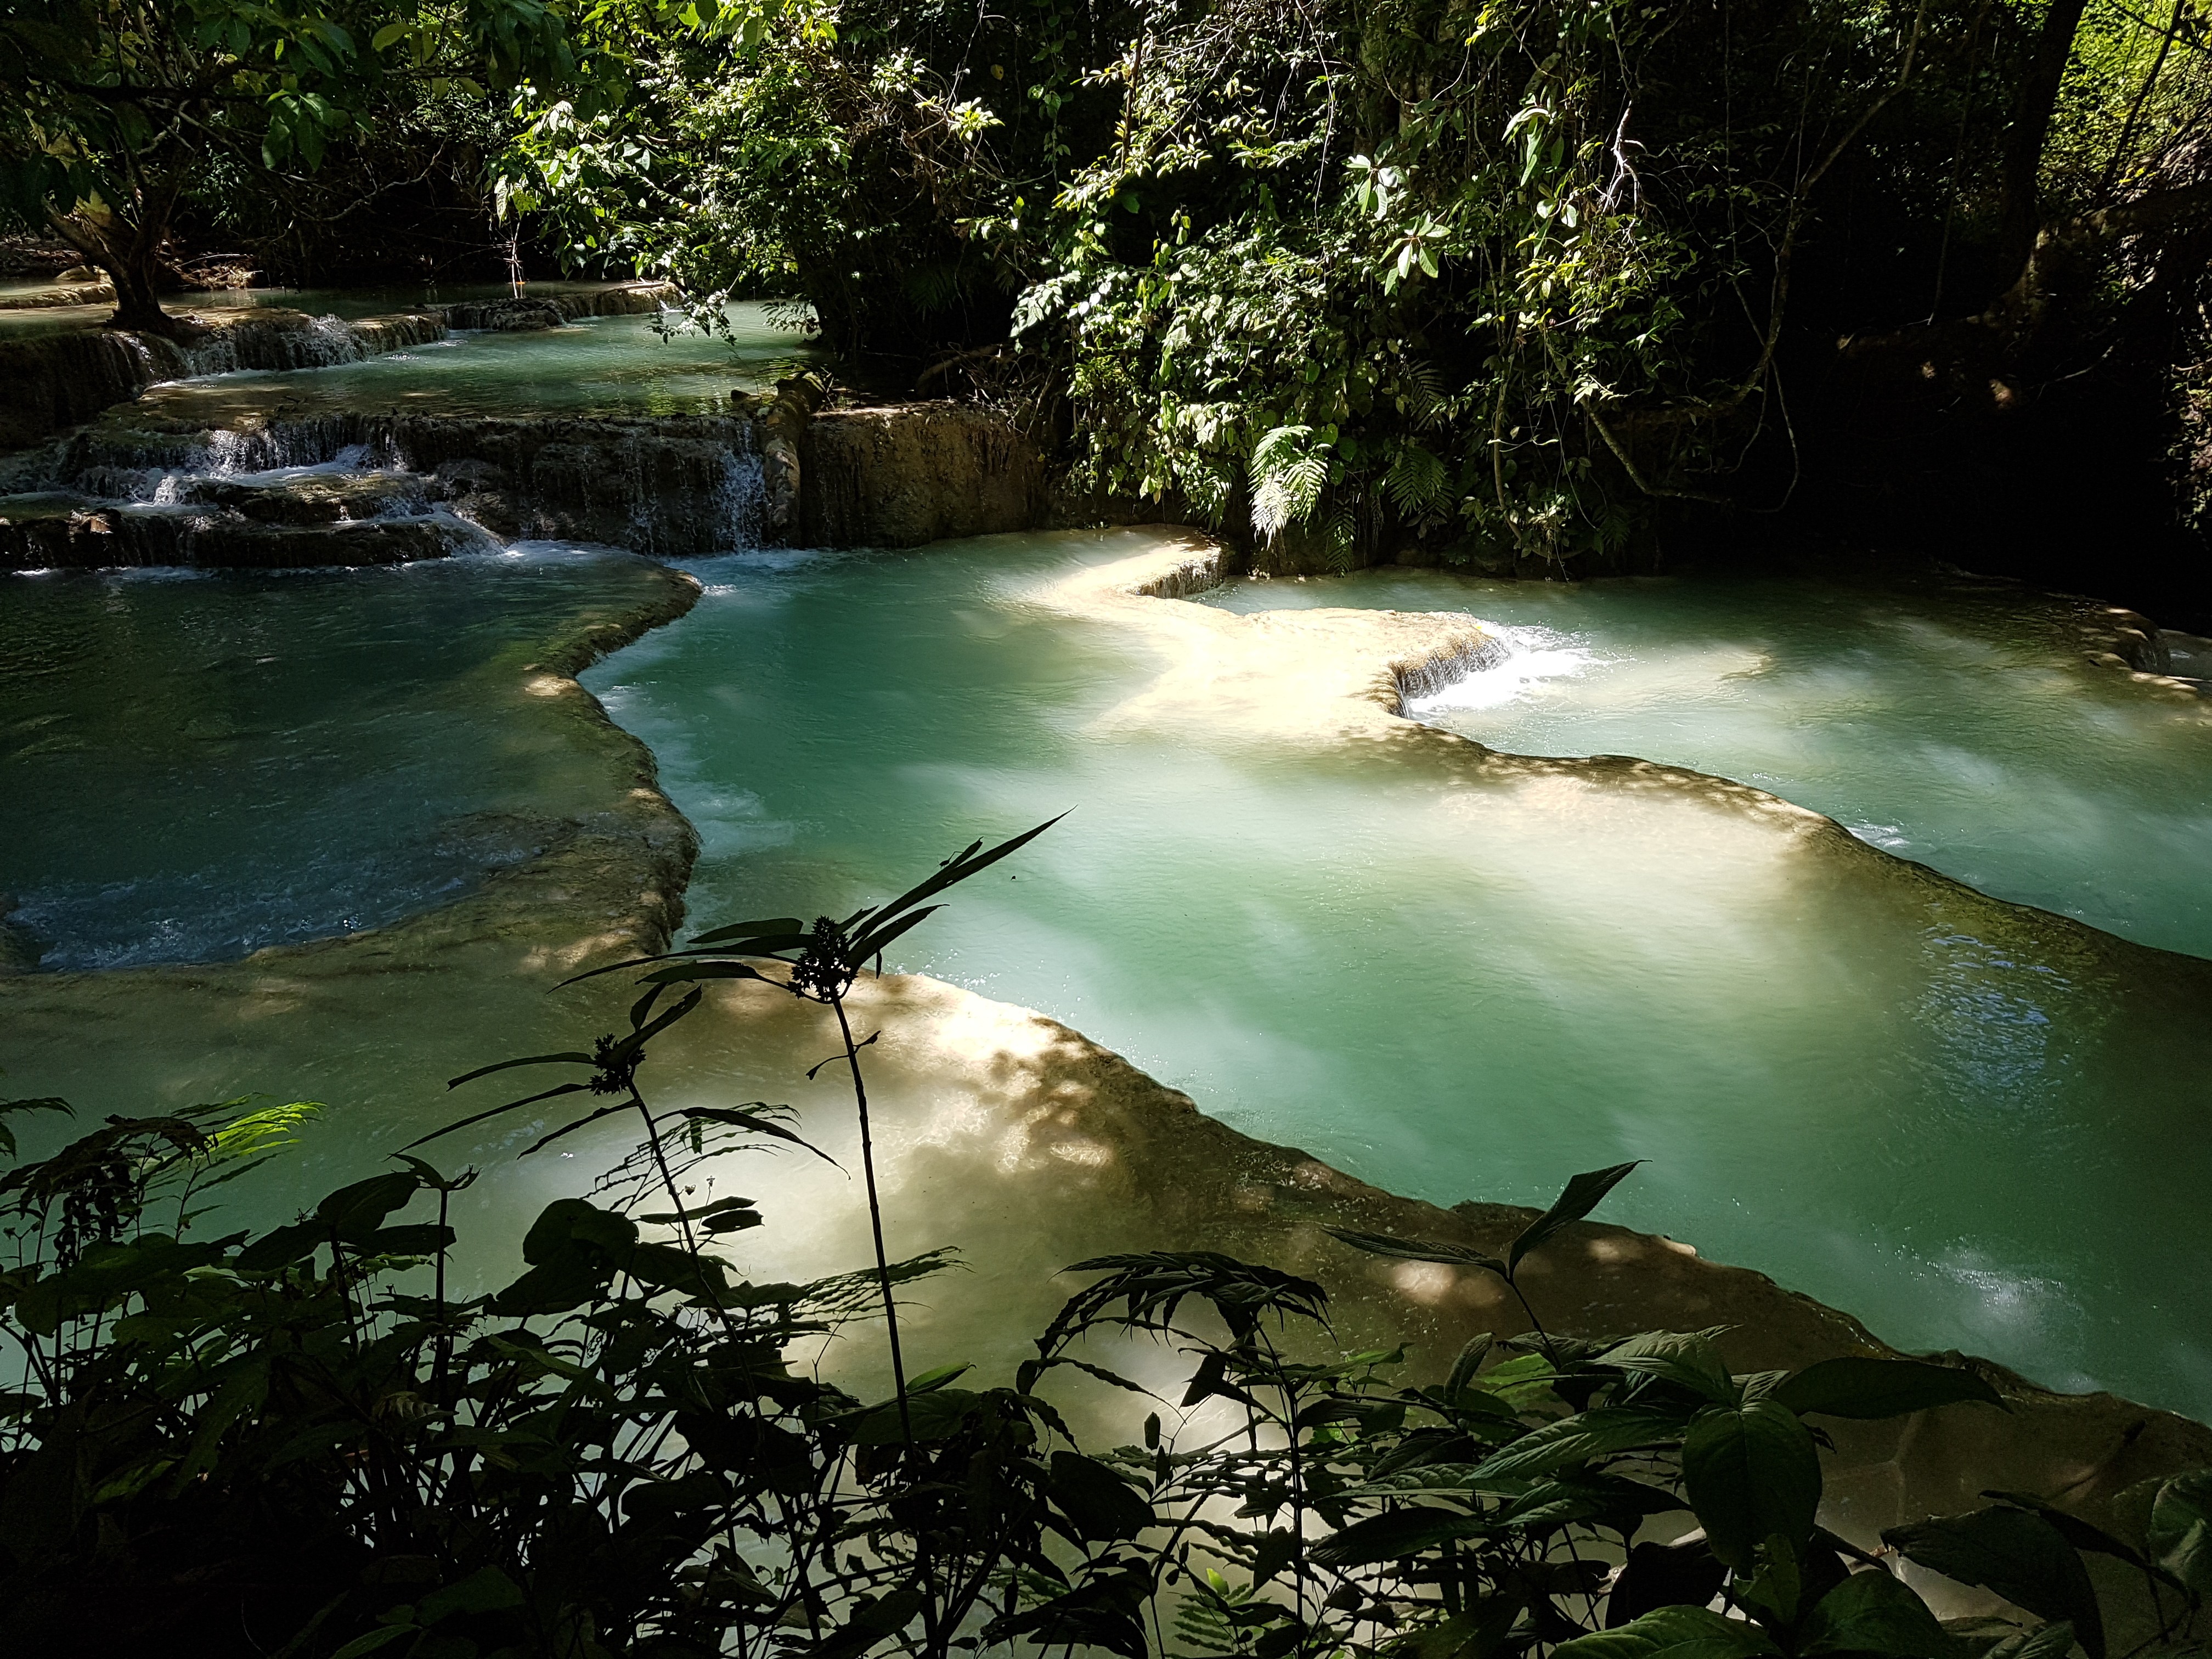 The rich green hues of the gently flowing cascades at Kuang Si Falls. Photos: Cedric Tan